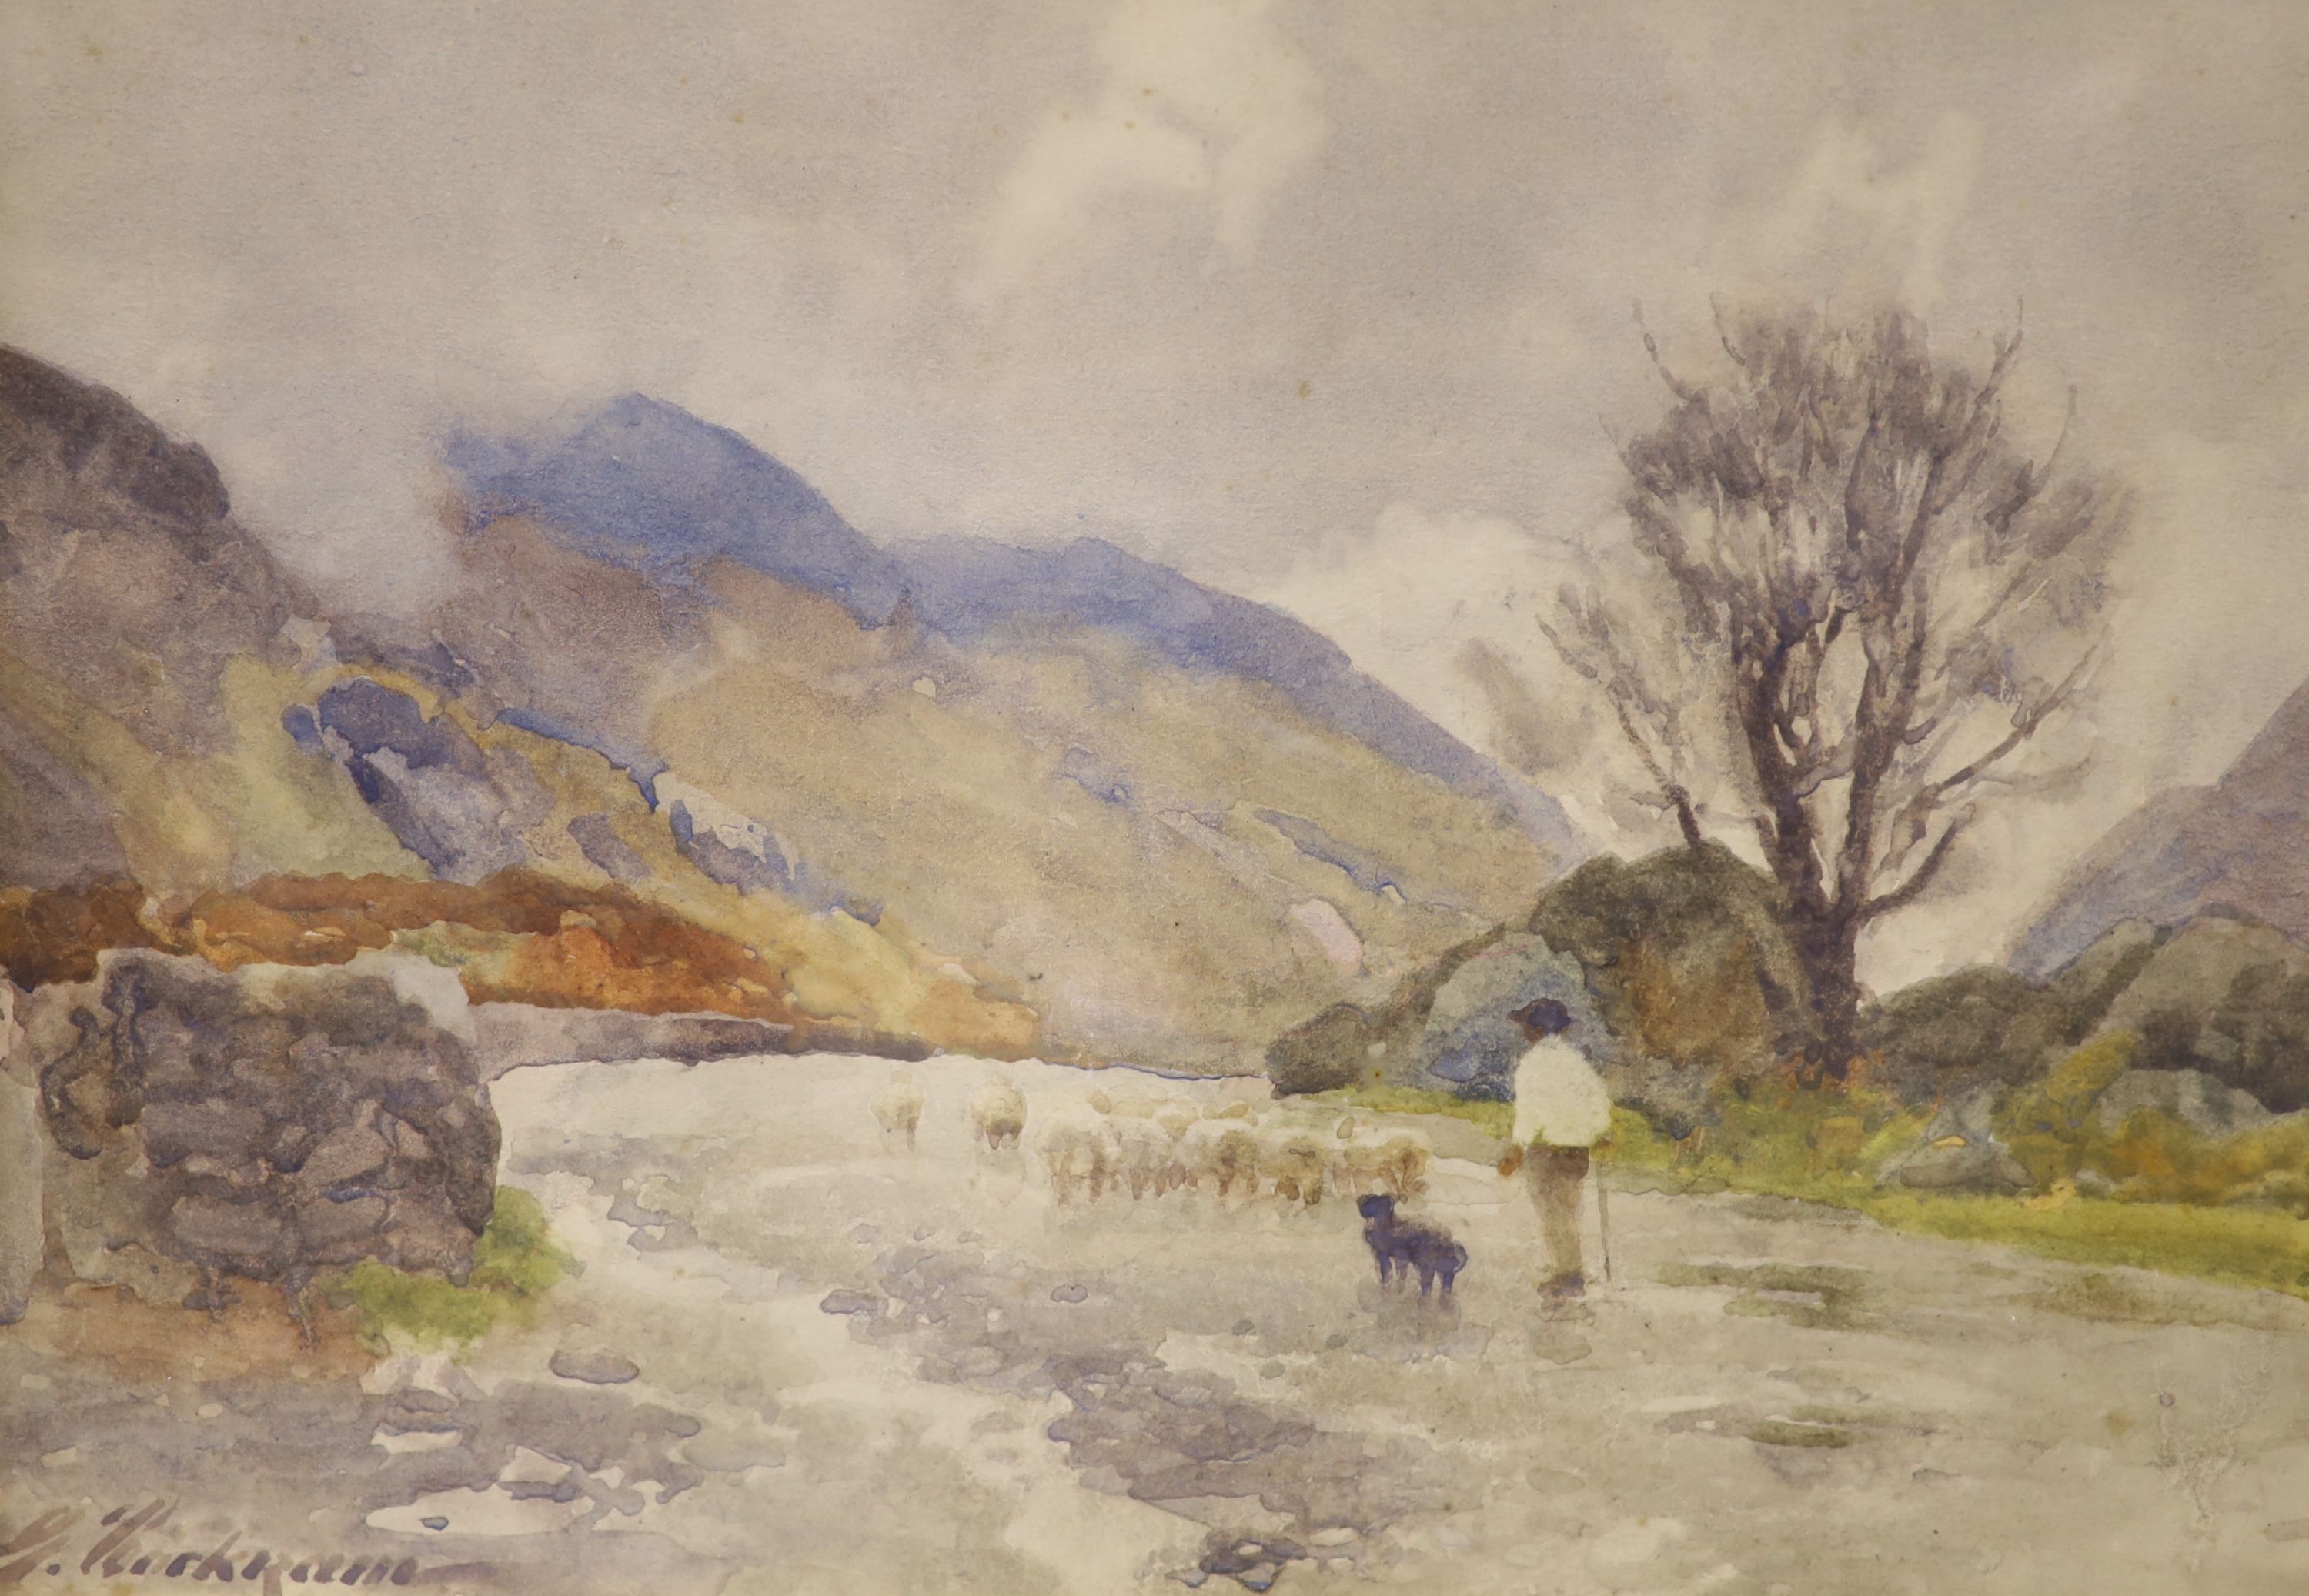 George Cockram (1861-1950), two watercolours, The Pass of Ffrancou and Rowing Boat on the marshes, both signed, 17 x 24cm and 18 x 25cm